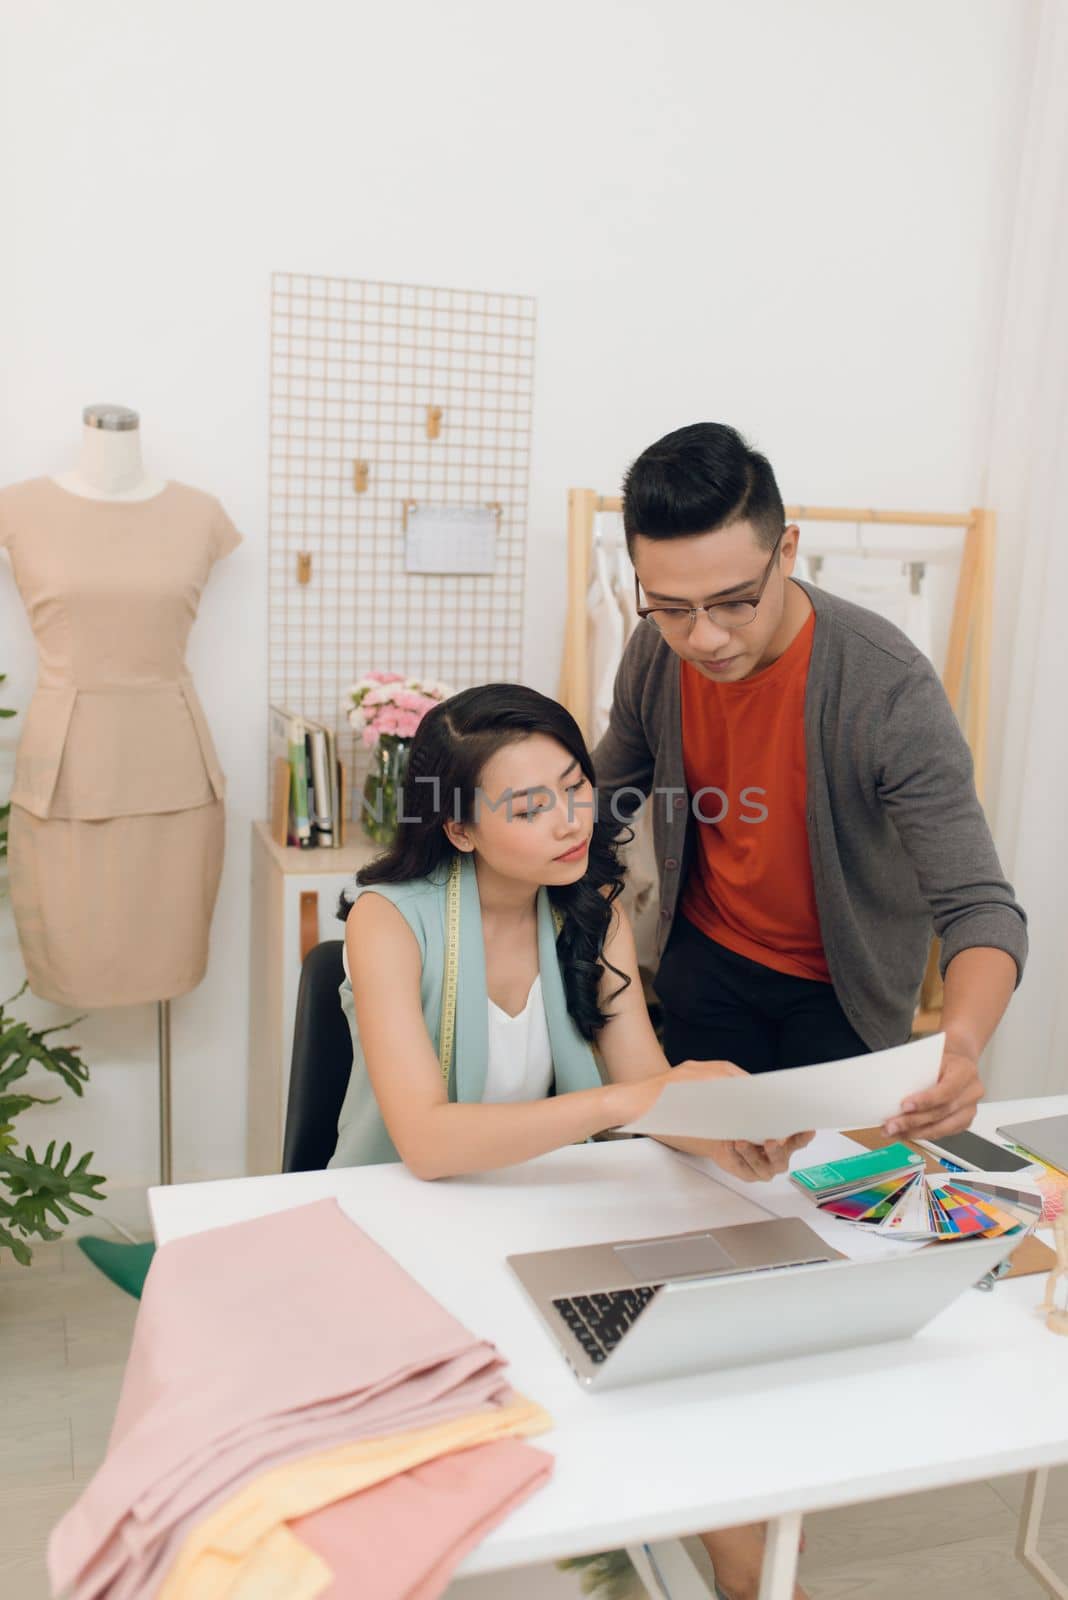 Two fashion designers working together on a desk by makidotvn